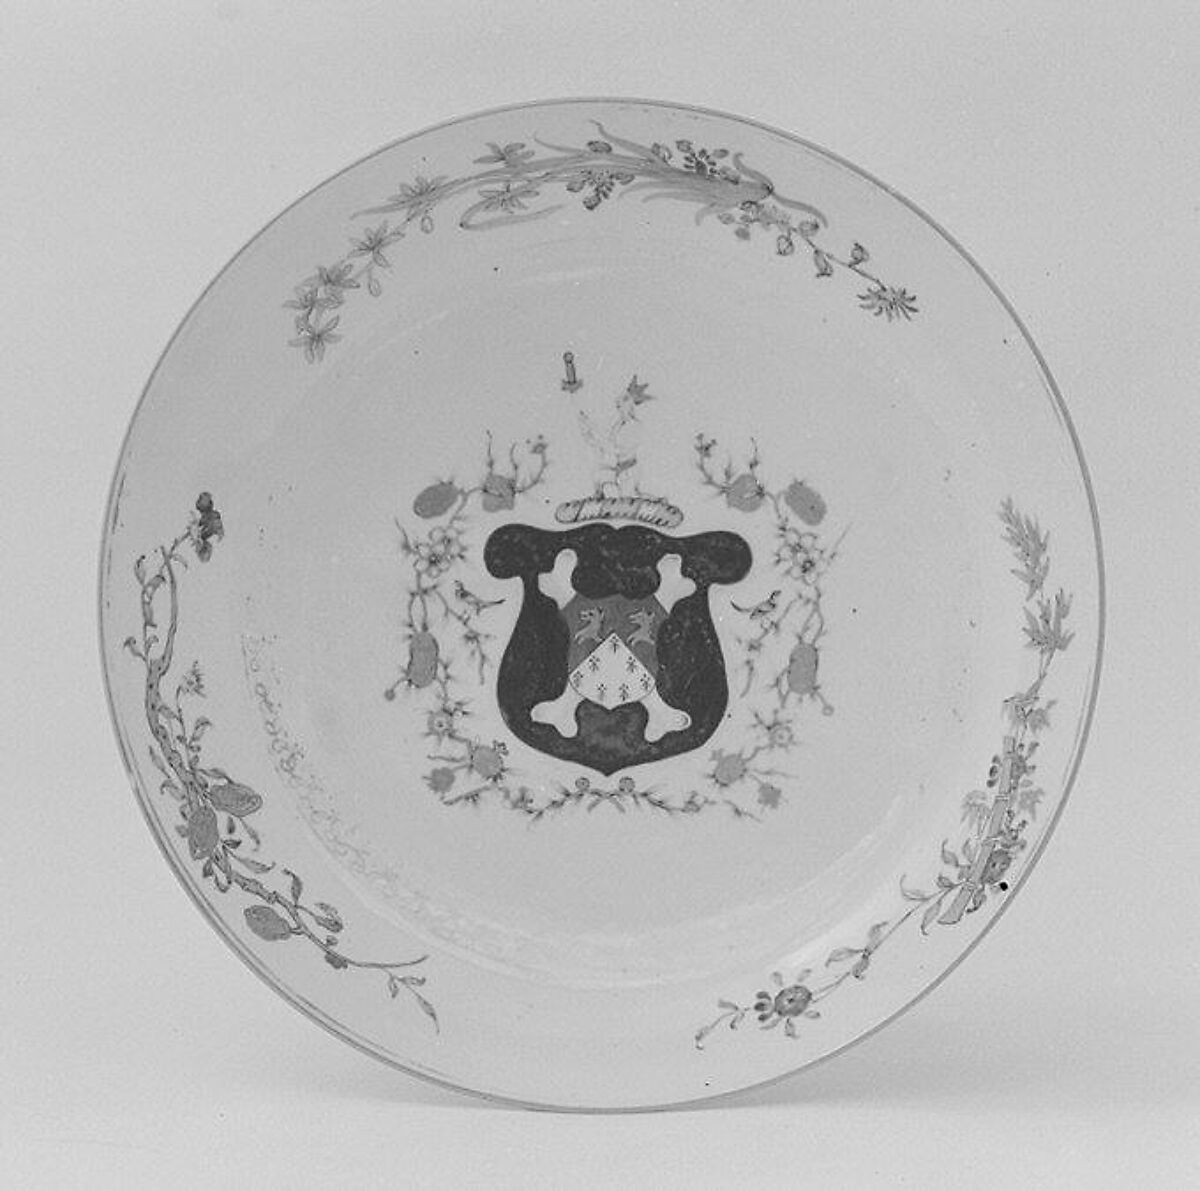 Deep dish (part of a service), Hard-paste porcelain, Chinese, for British market 